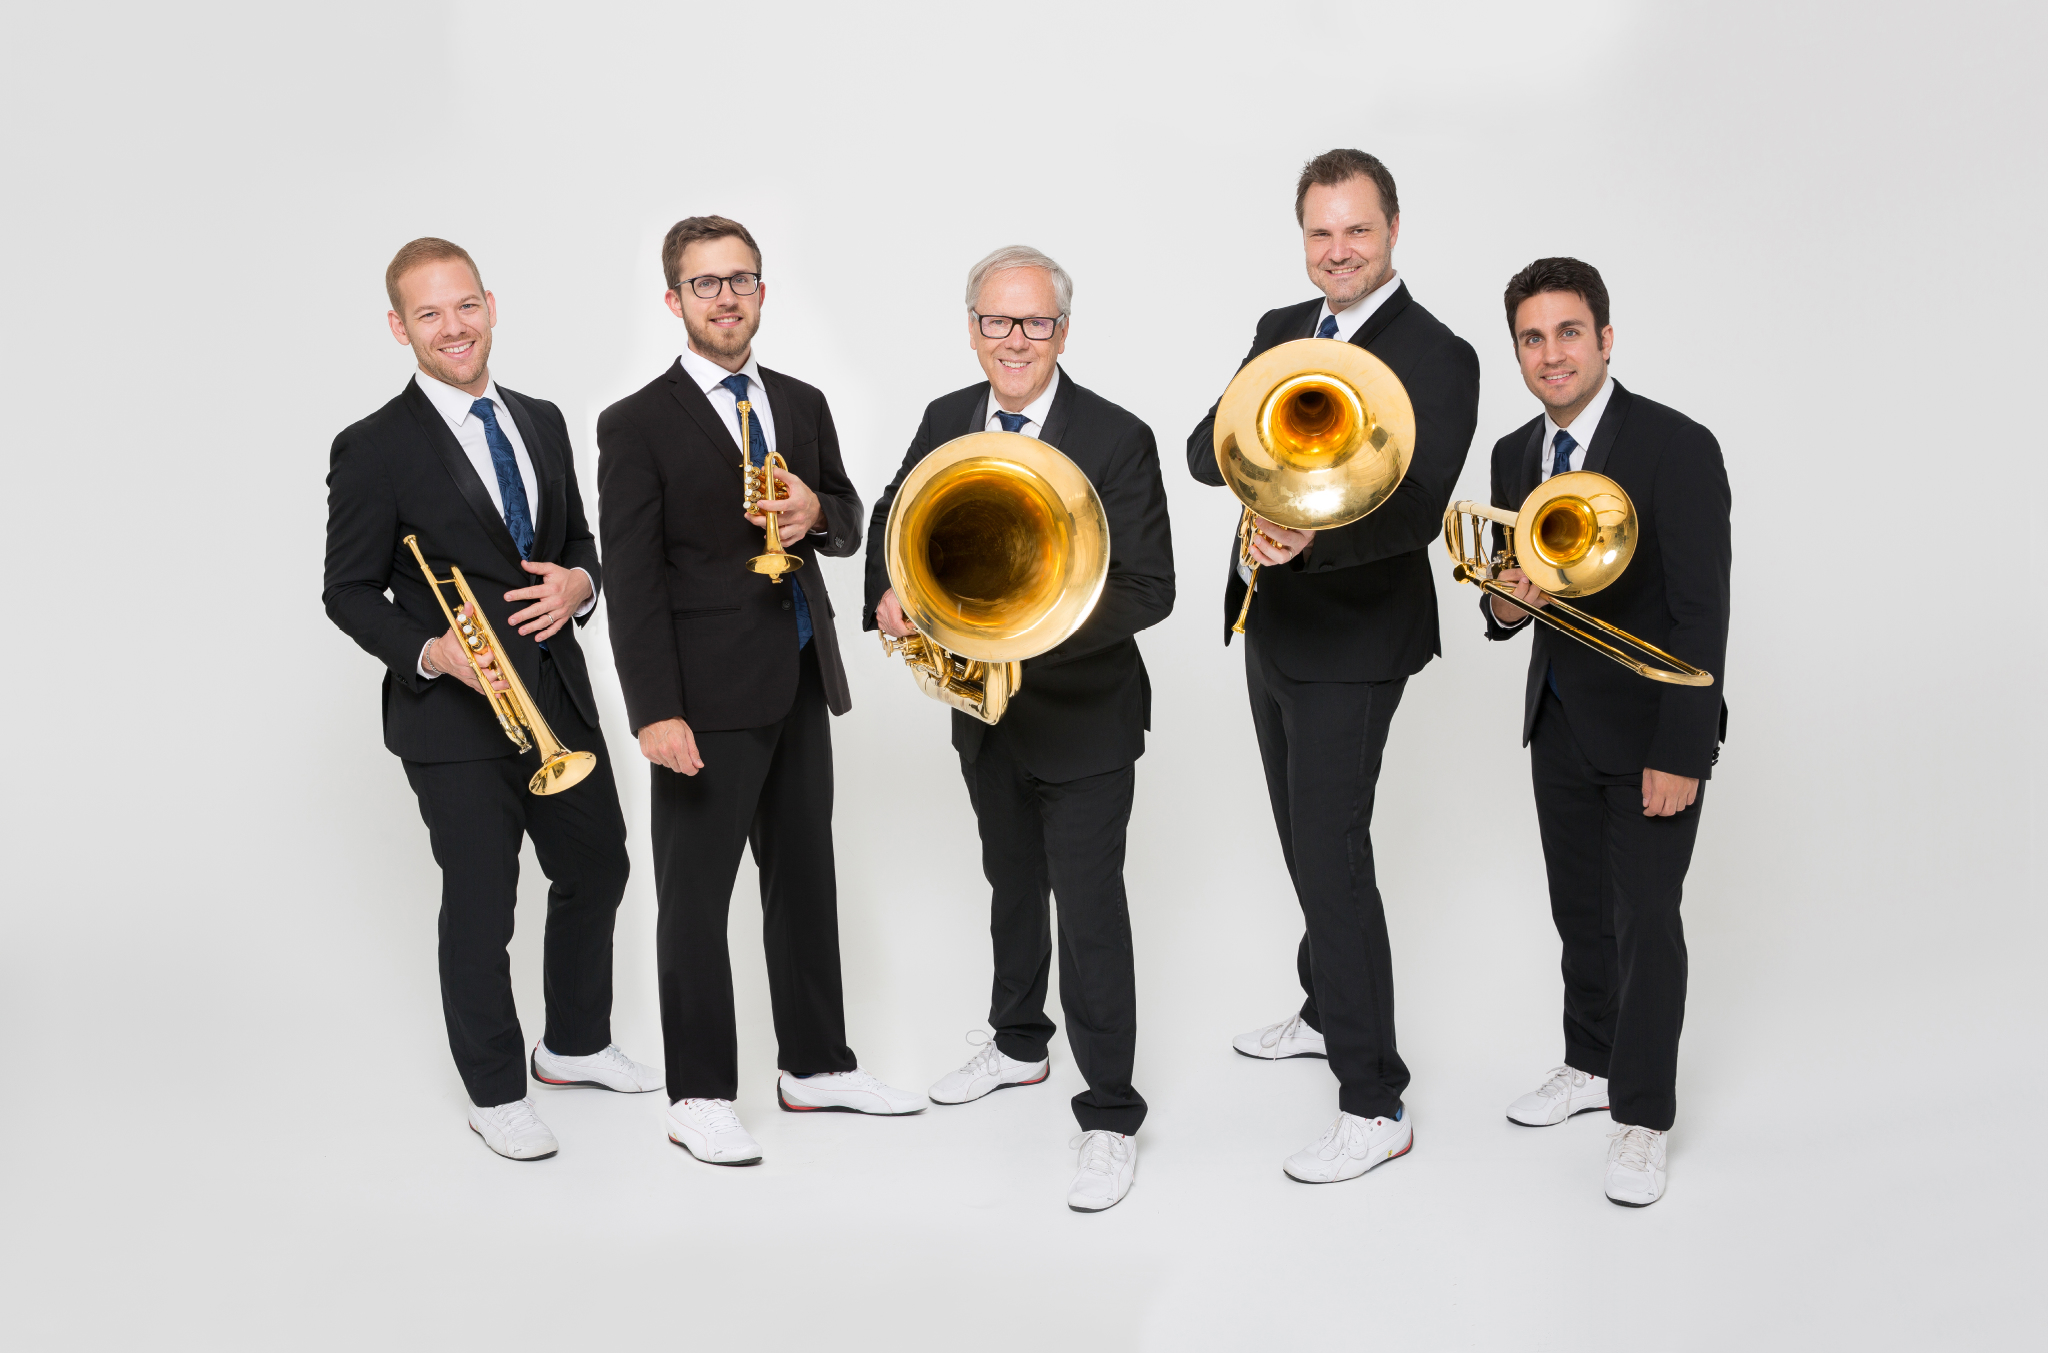 Henderson Brass Band – hsutrumpets…70 years of excellence